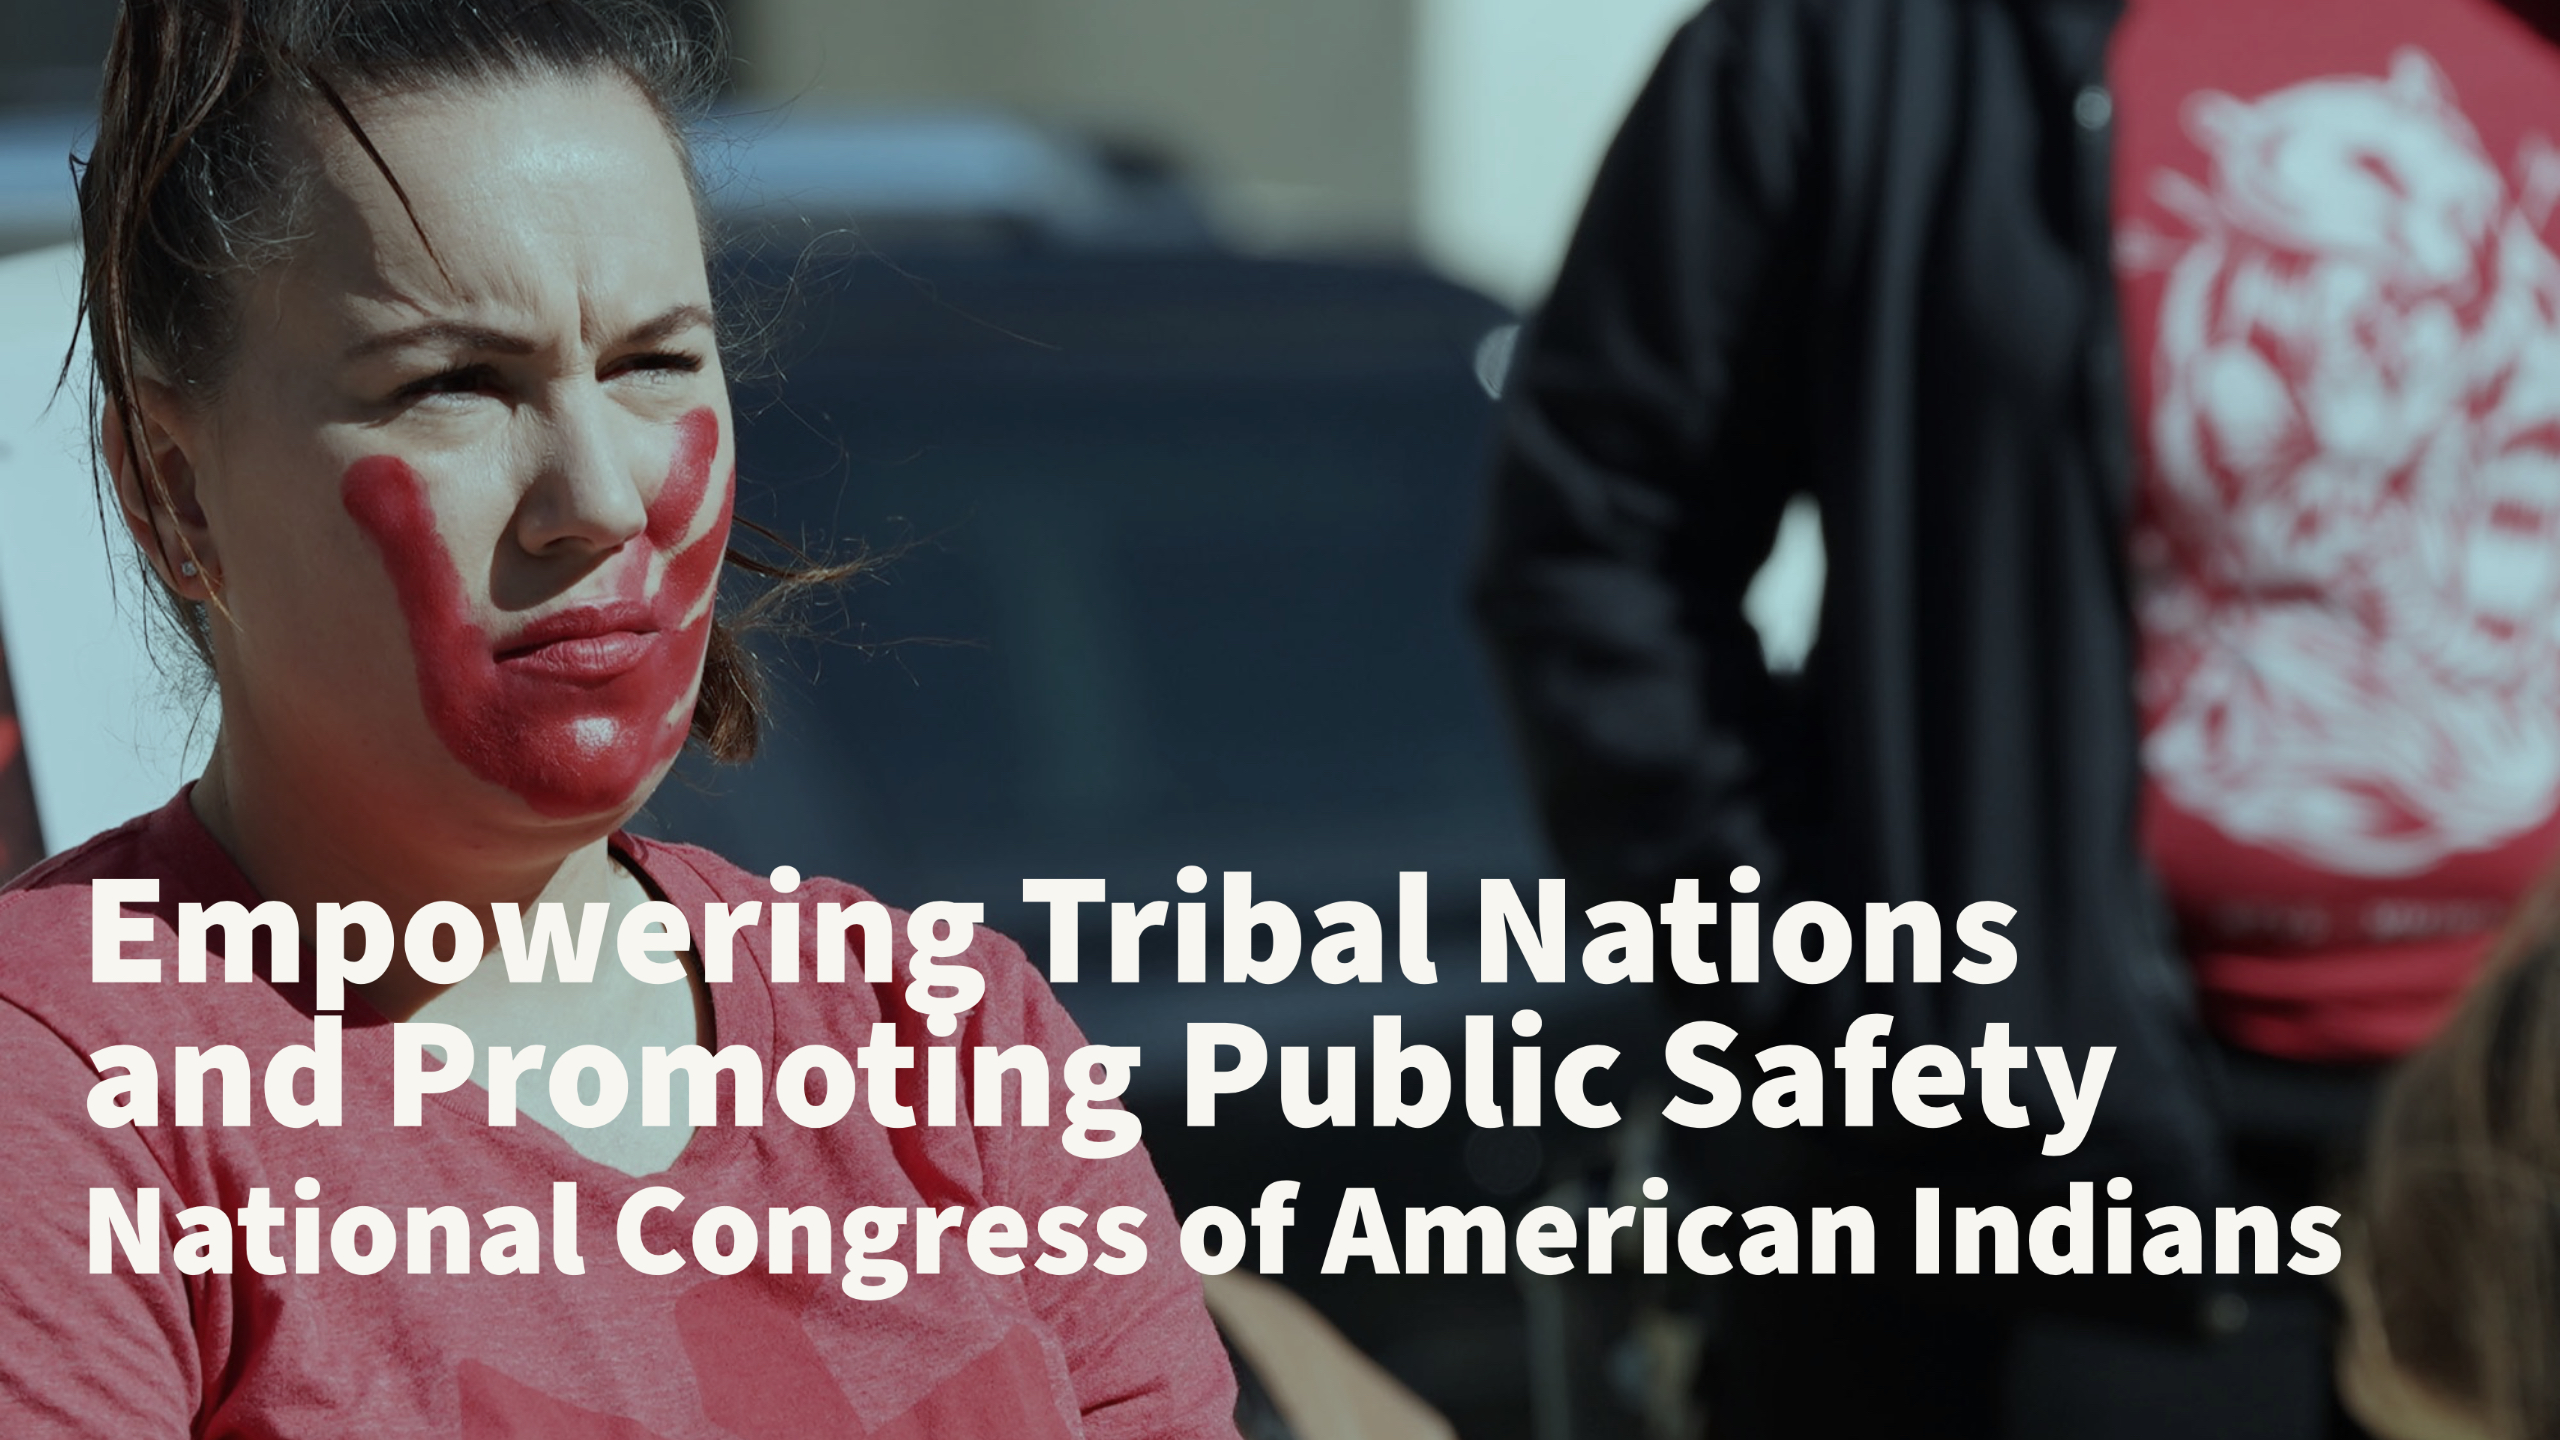 Empowering Tribal Nations and Promoting Public Safety